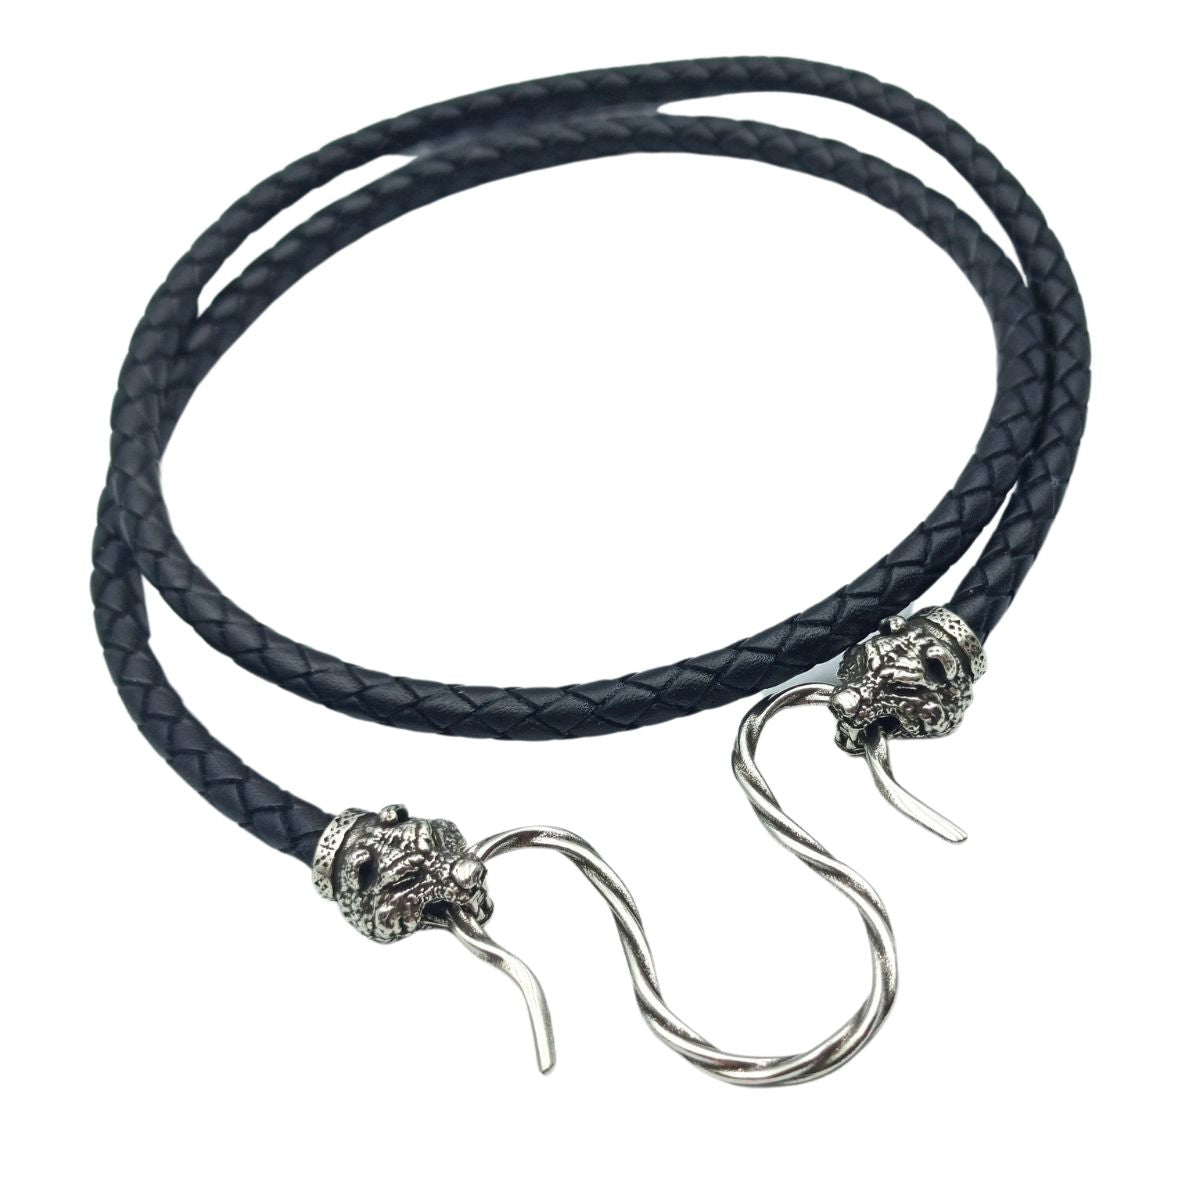 STRONG VOID LEATHER NECKLACE OUR's-